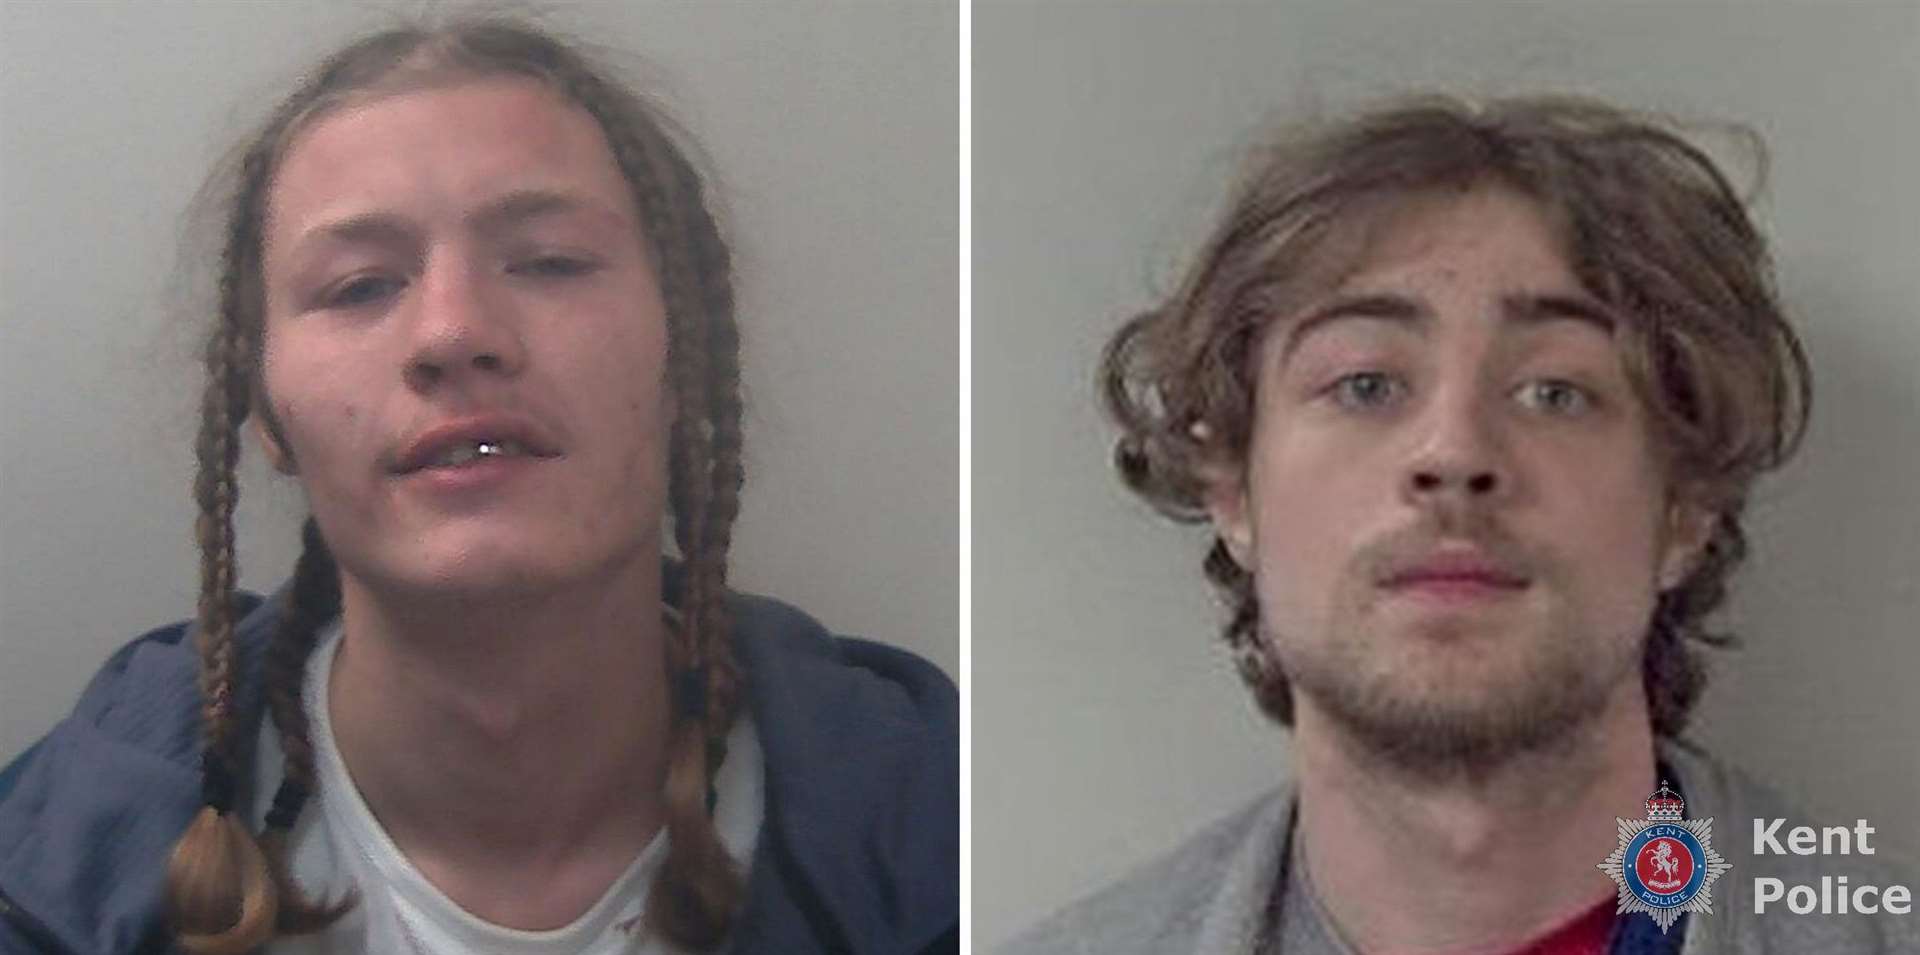 Jack Grindley, 21, and Leon Melson, 20, were jailed after breaking into a property in Lauren Van Der Post Way in Ashford